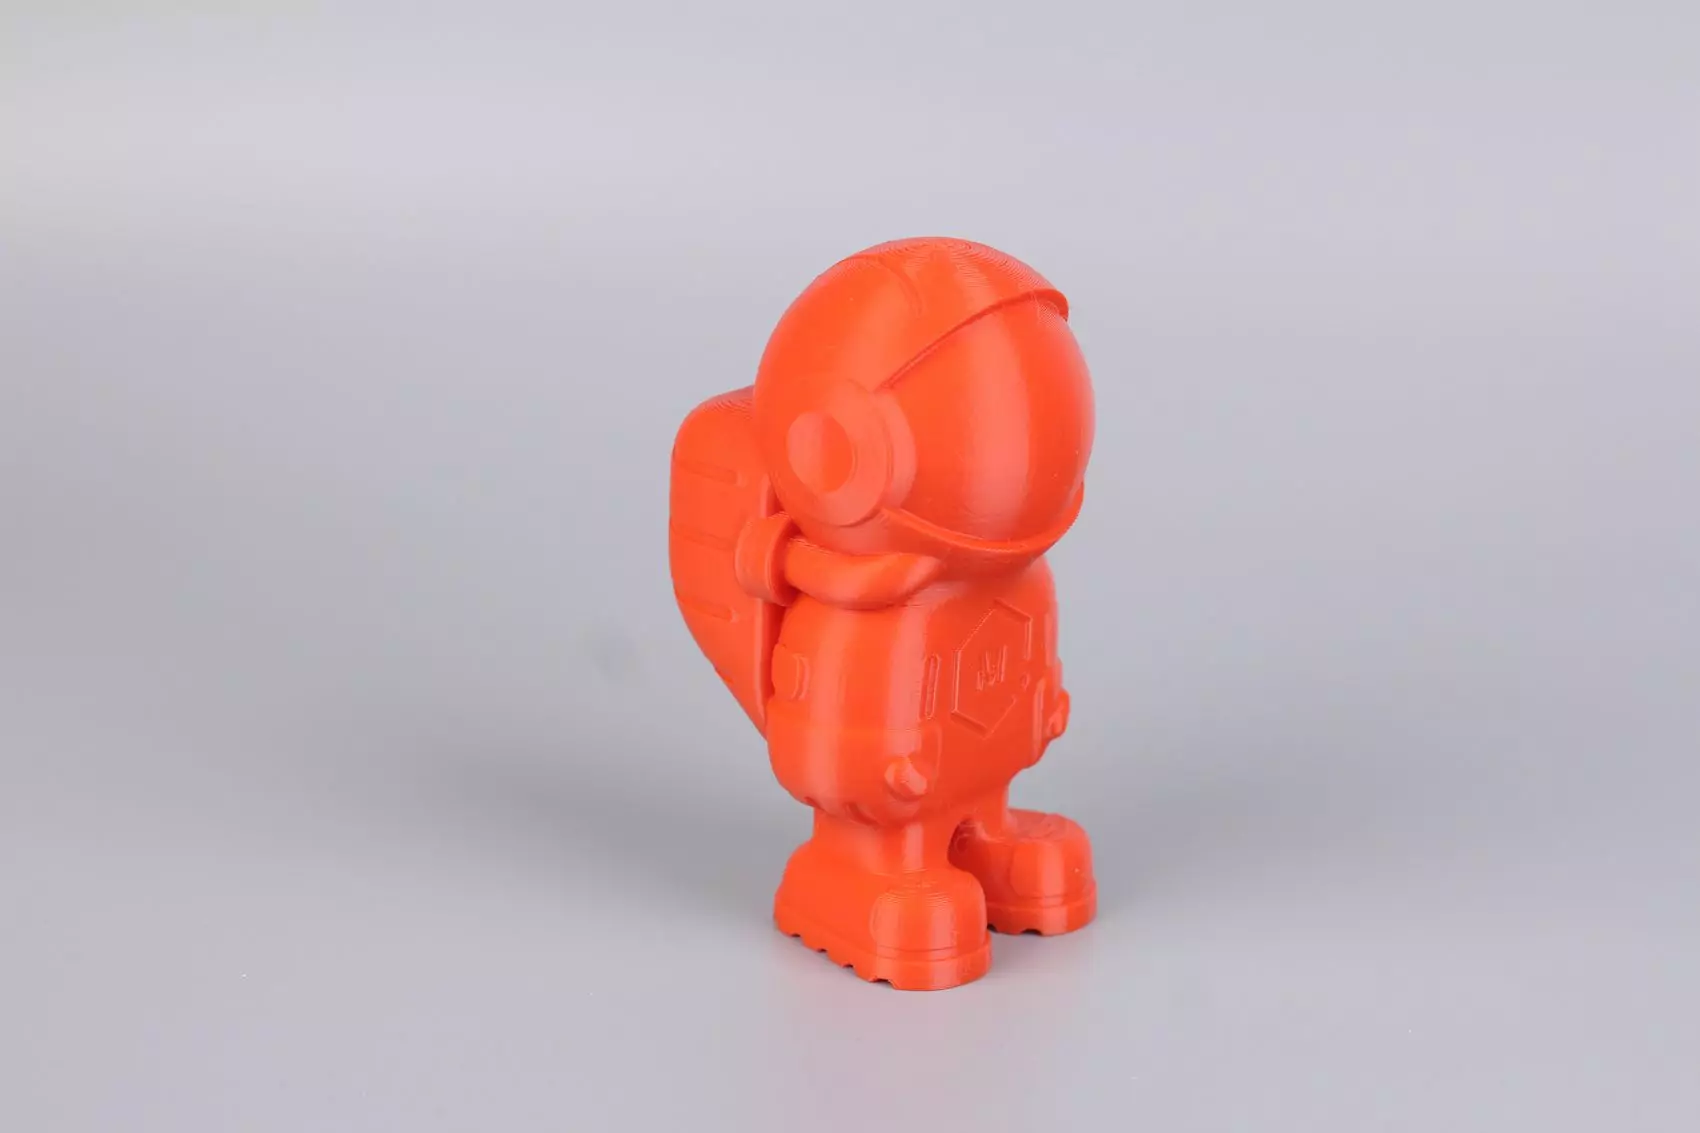 Phil A Ment PLA print on Ender 5 S12 | Creality Ender-5 S1 Review: Is it a worthy upgrade?